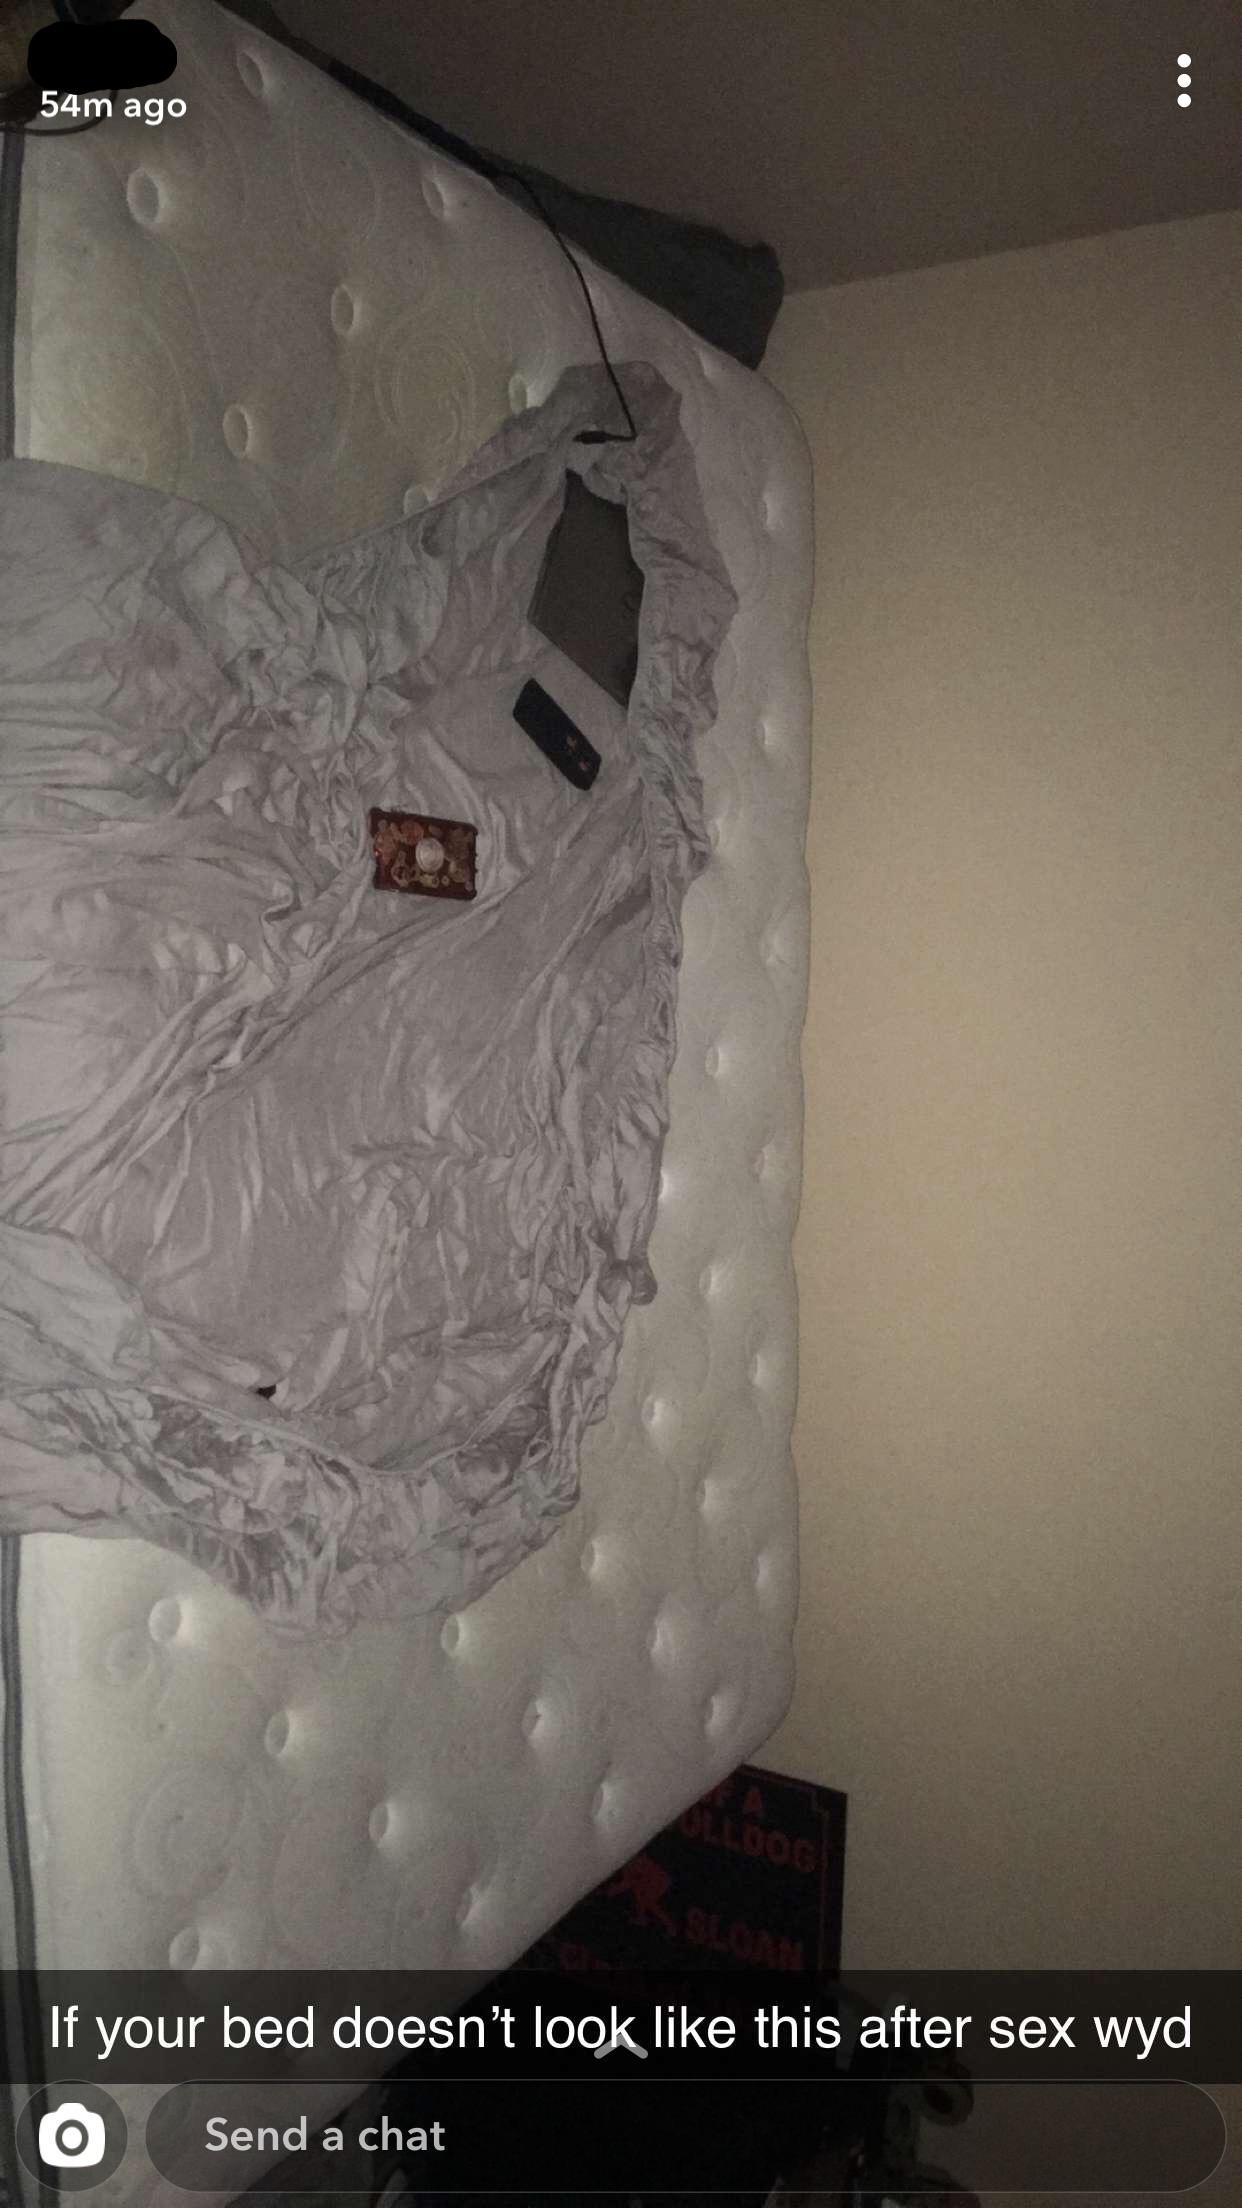 design - 54m ago If your bed doesn't look this after sex wyd Send a chat